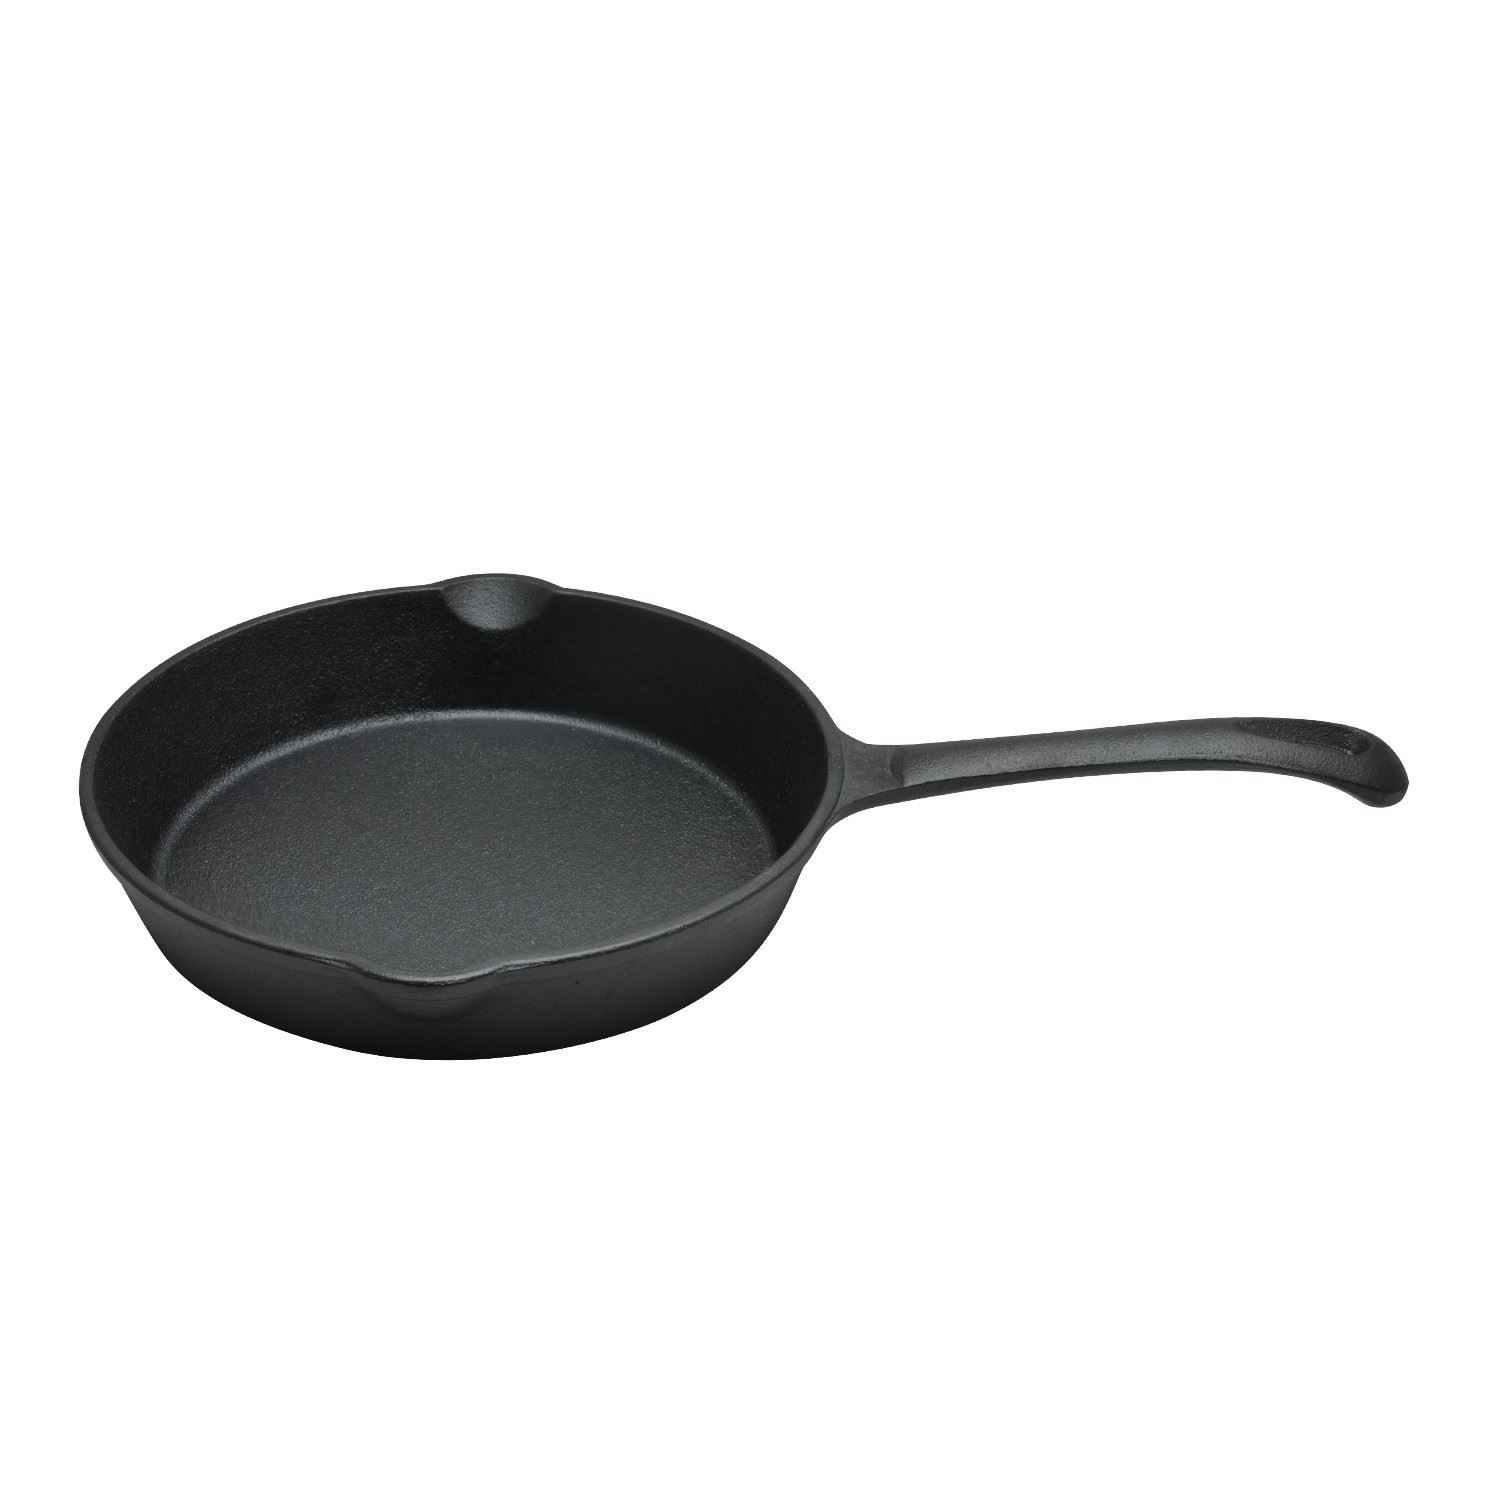 Kitchen Master Cast Iron Frying Pan, 20.5Cm, Cost14 